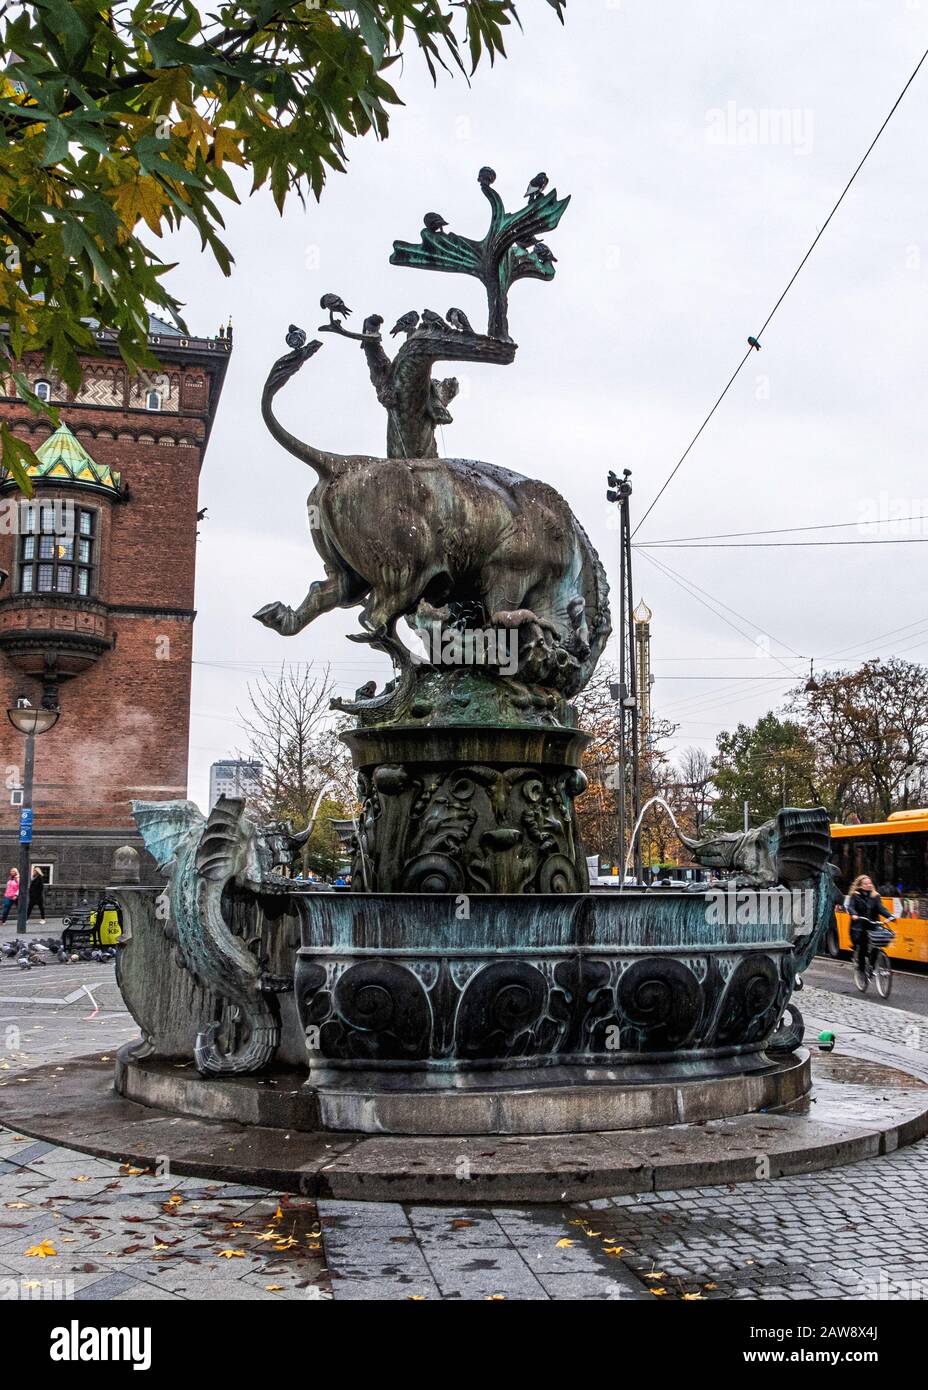 The Dragon Fountain 1904 with sculpture of bull and a dragon in combat  designed by Thorvald Bindesbøll and Joakim Skovgaard,  Rådhuspladse,Copenhagen Stock Photo - Alamy